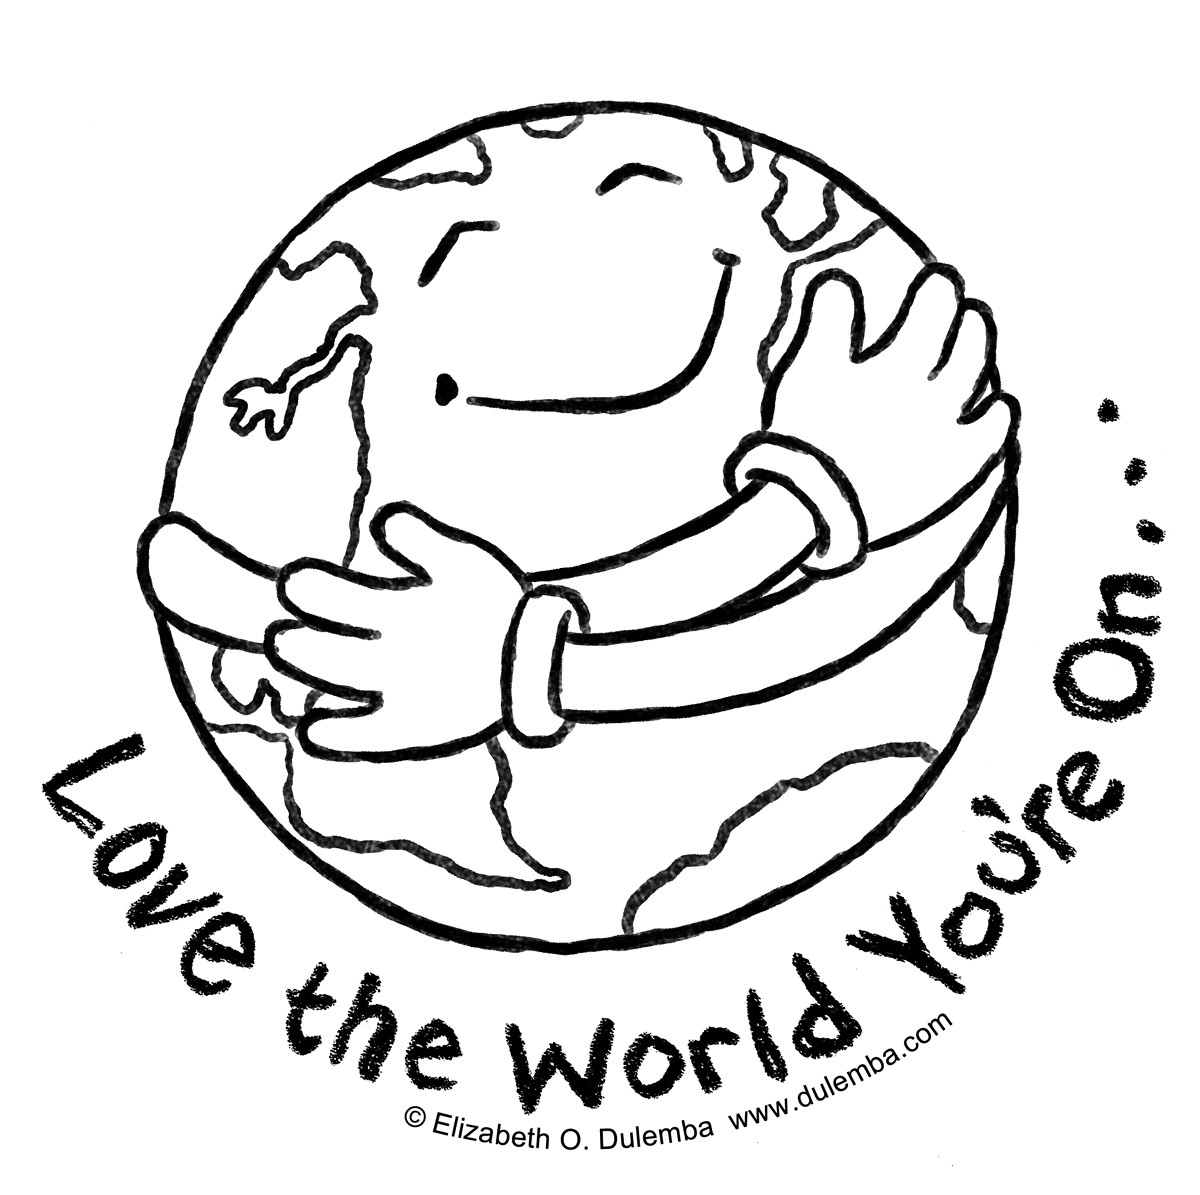 Save The Earth Coloring Pages Great Planet Earth Coloring Pages Page 2 Ubiquitytheatre Com Find